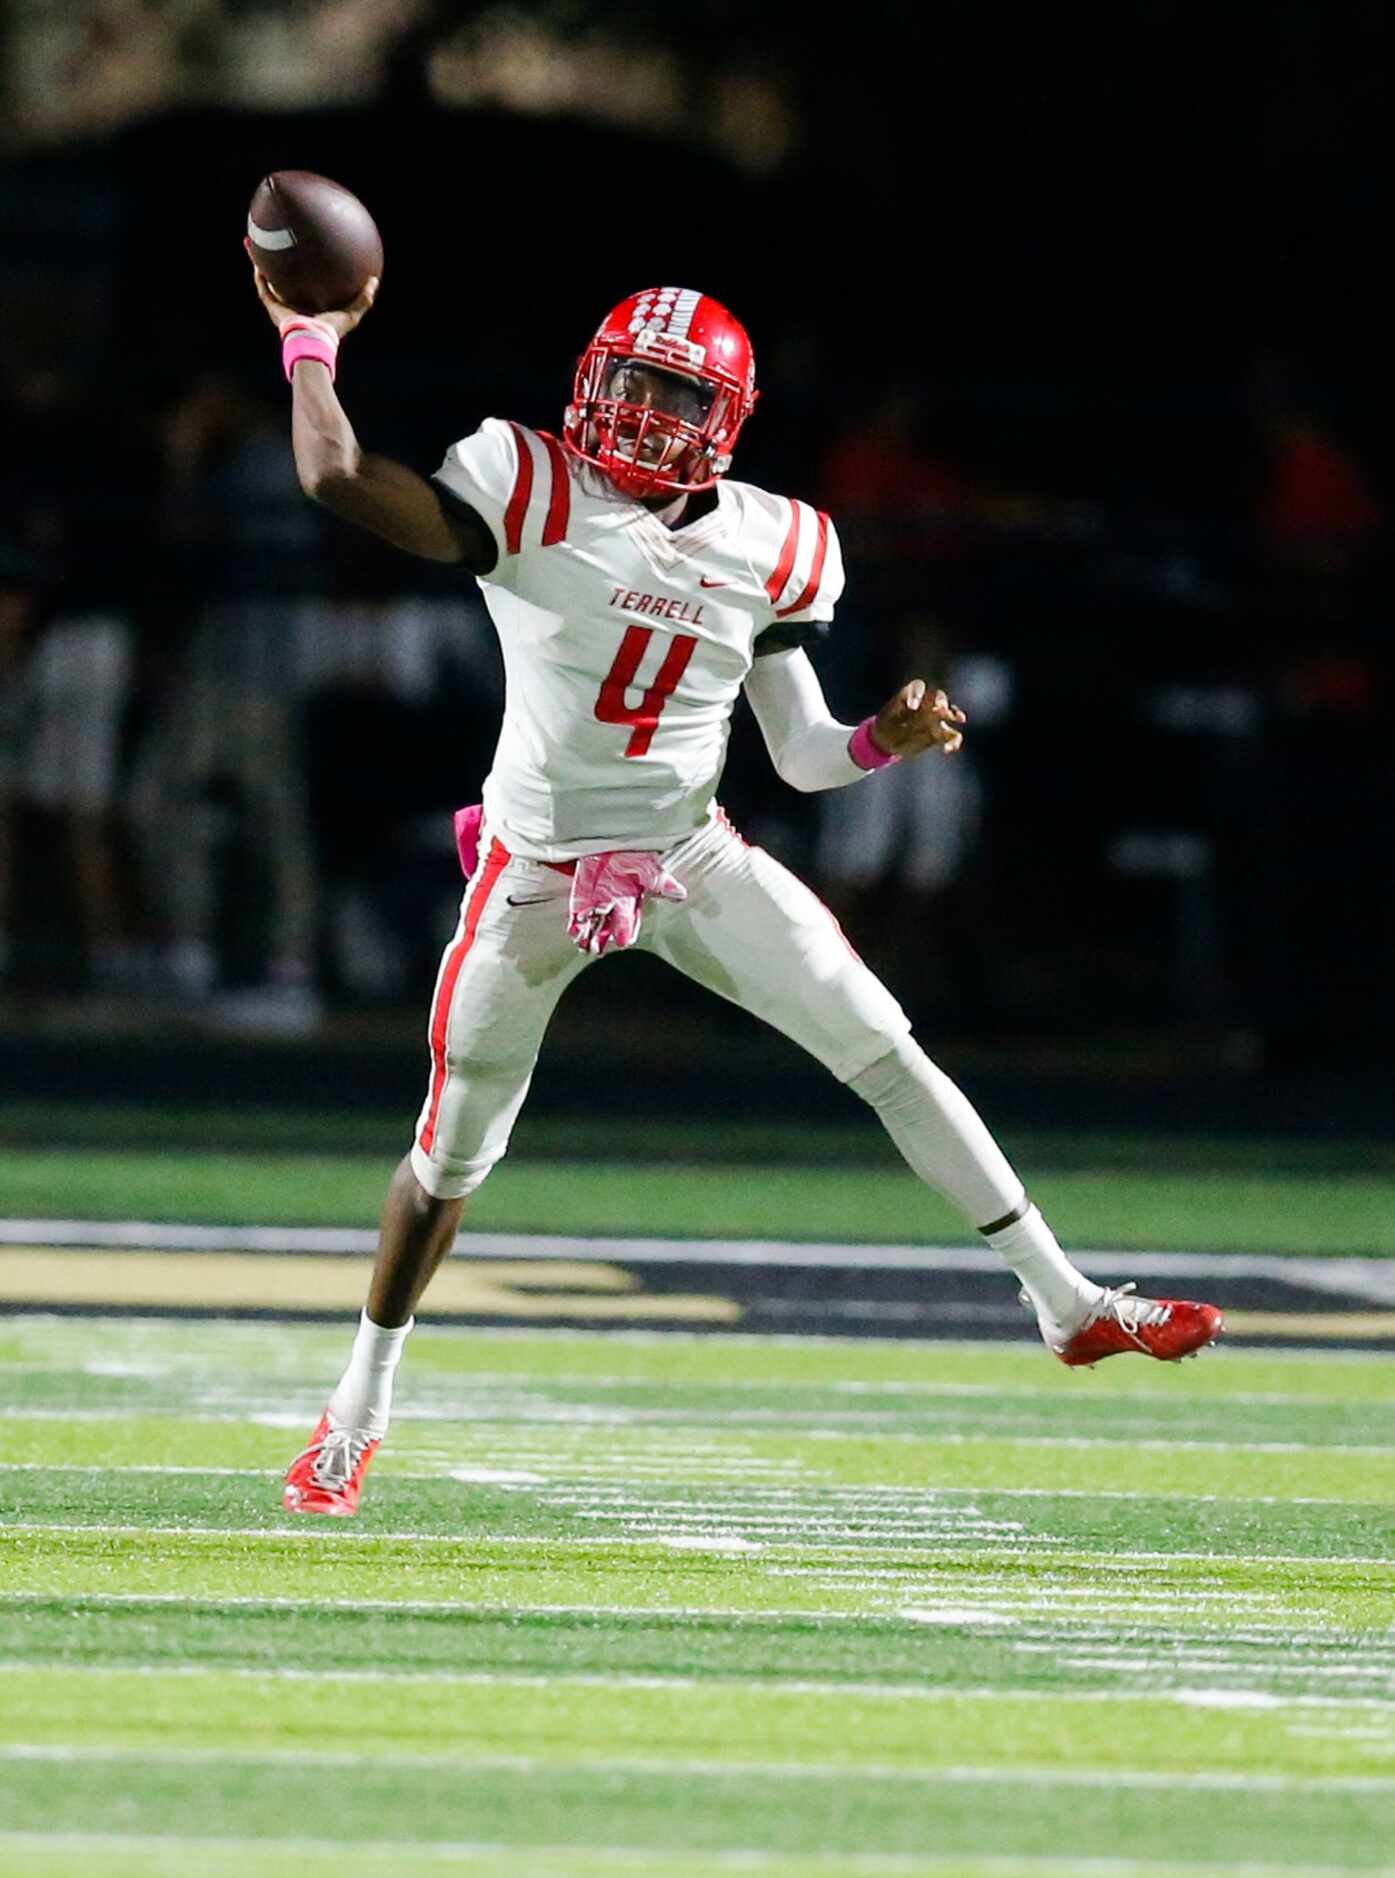 Terrell sophomore quarterback Lindon Henderson (4) throws during the first half of a high...